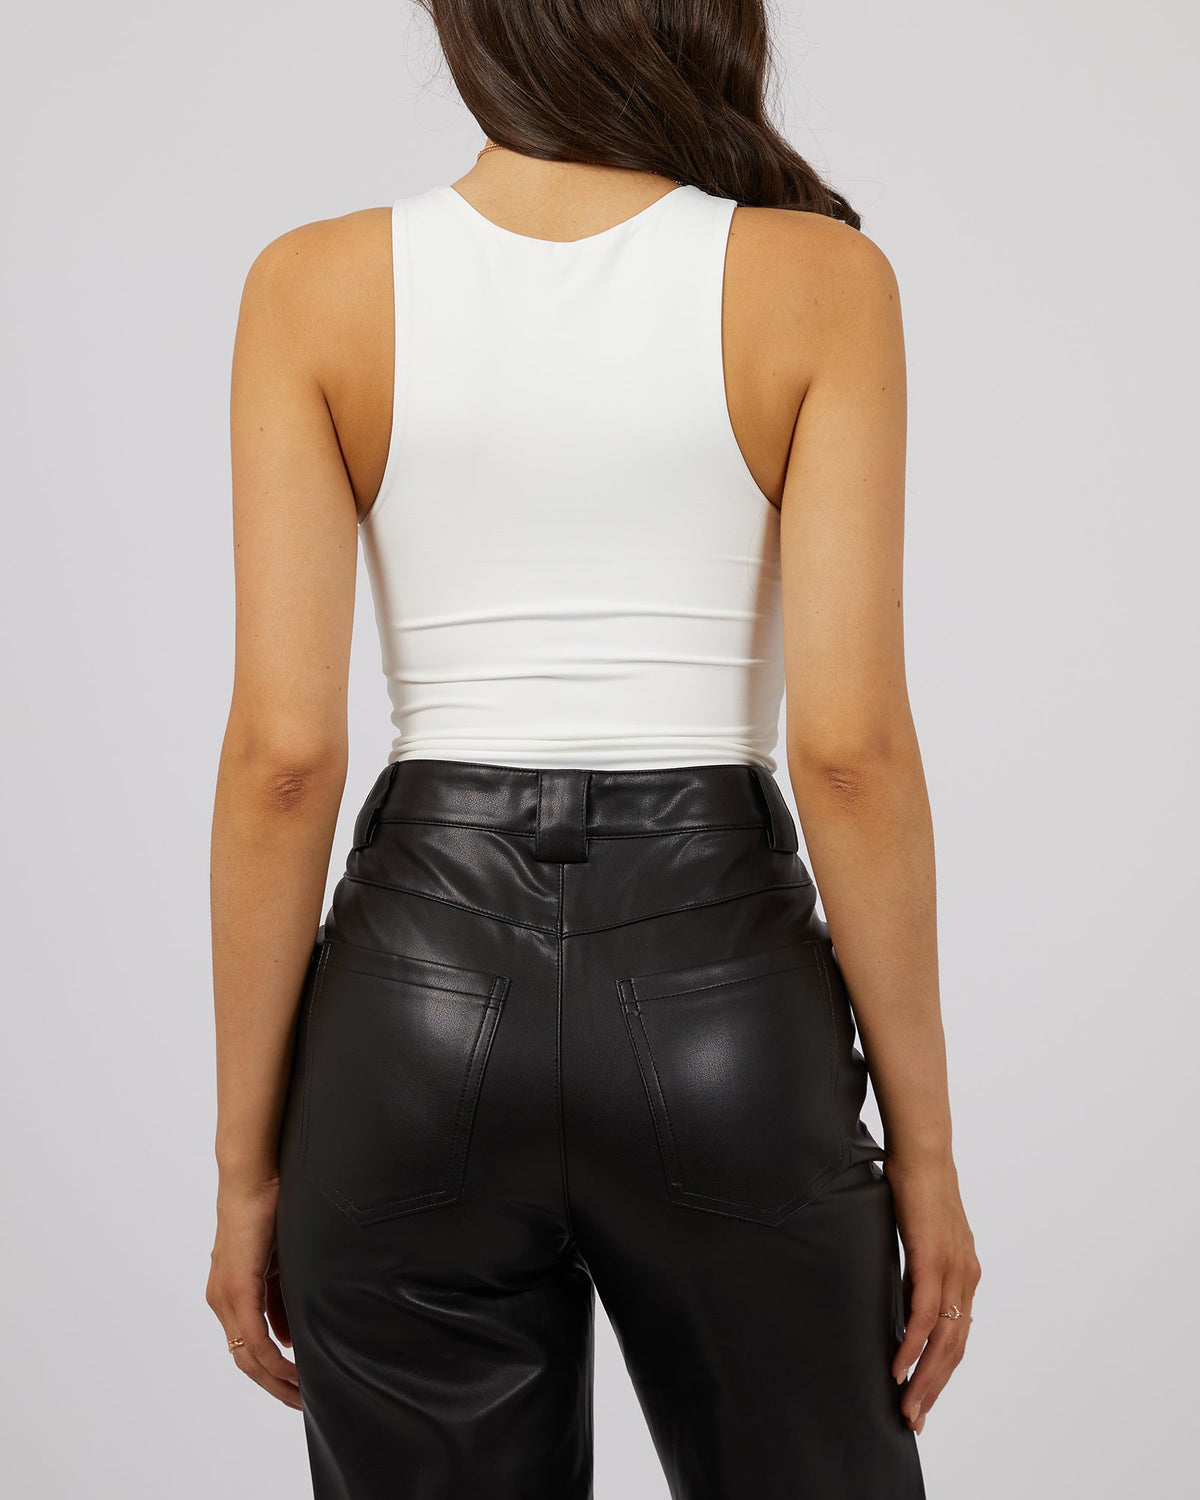 All About Eve-Eve Staple Bodysuit White-Edge Clothing